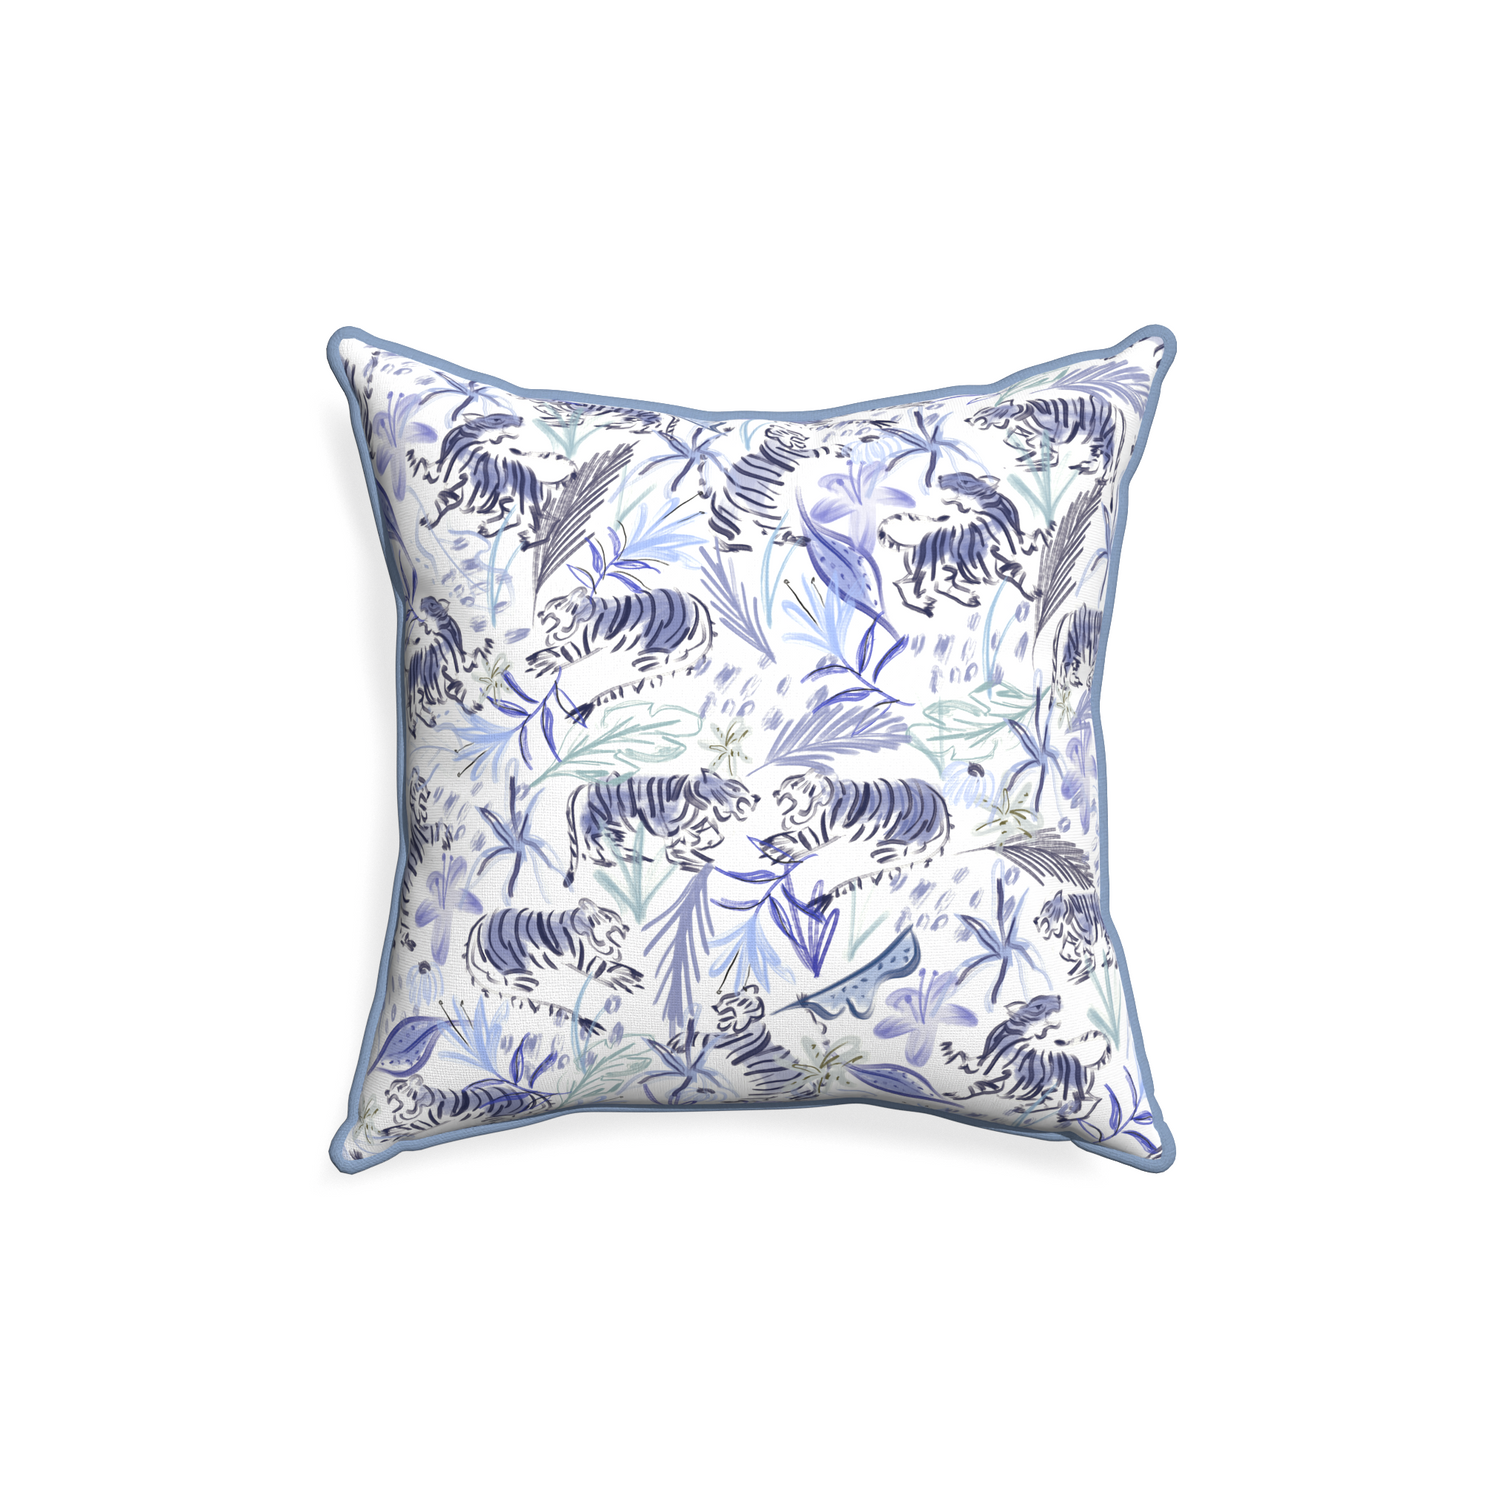 18-square frida blue custom blue with intricate tiger designpillow with sky piping on white background